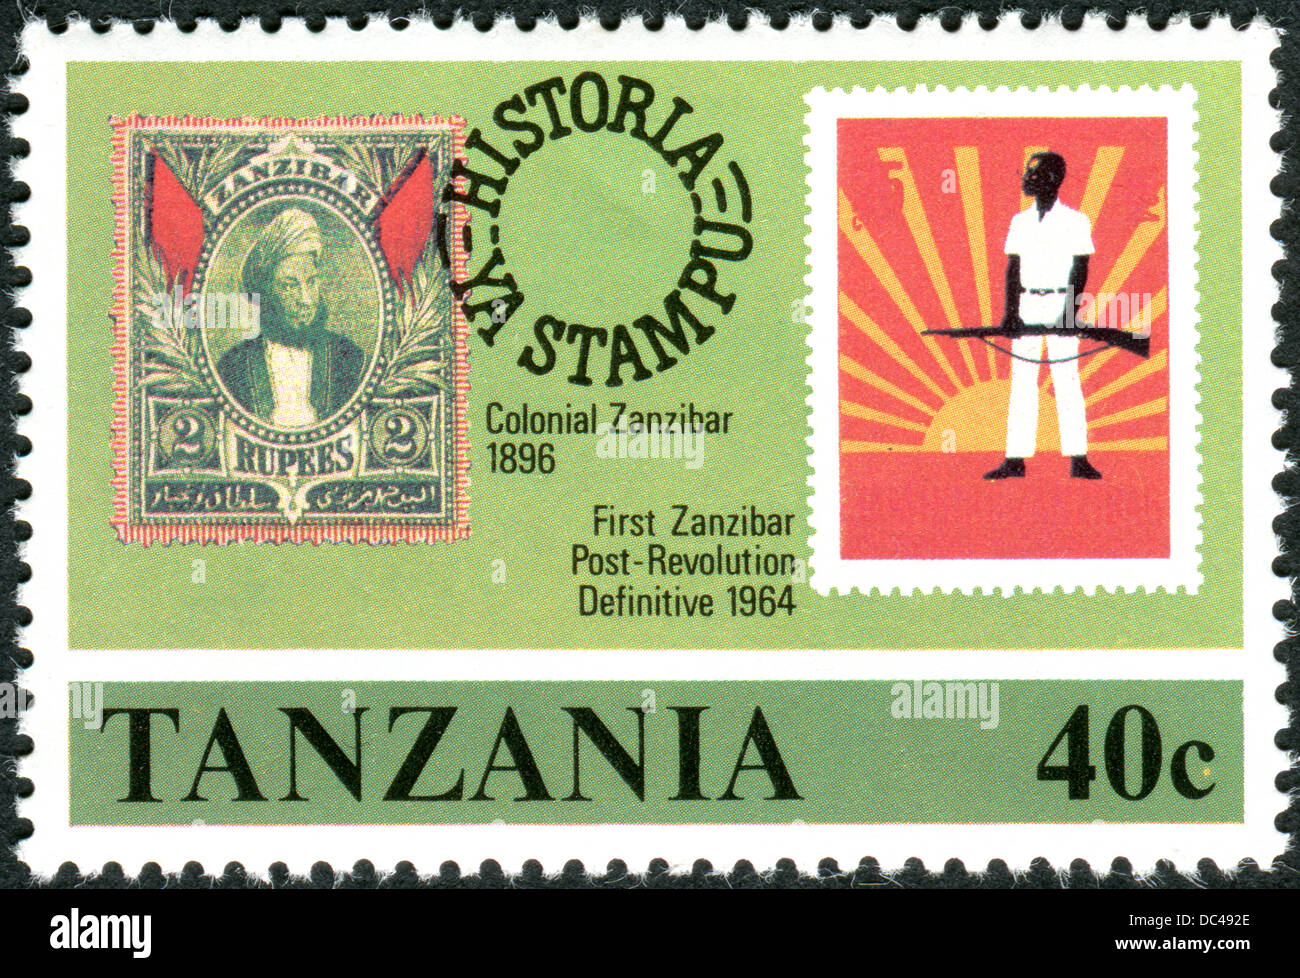 A postage stamp printed in Tanzania, shows two postage stamps Zanzibar in 1896 and 1964. Definitive Stock Photo